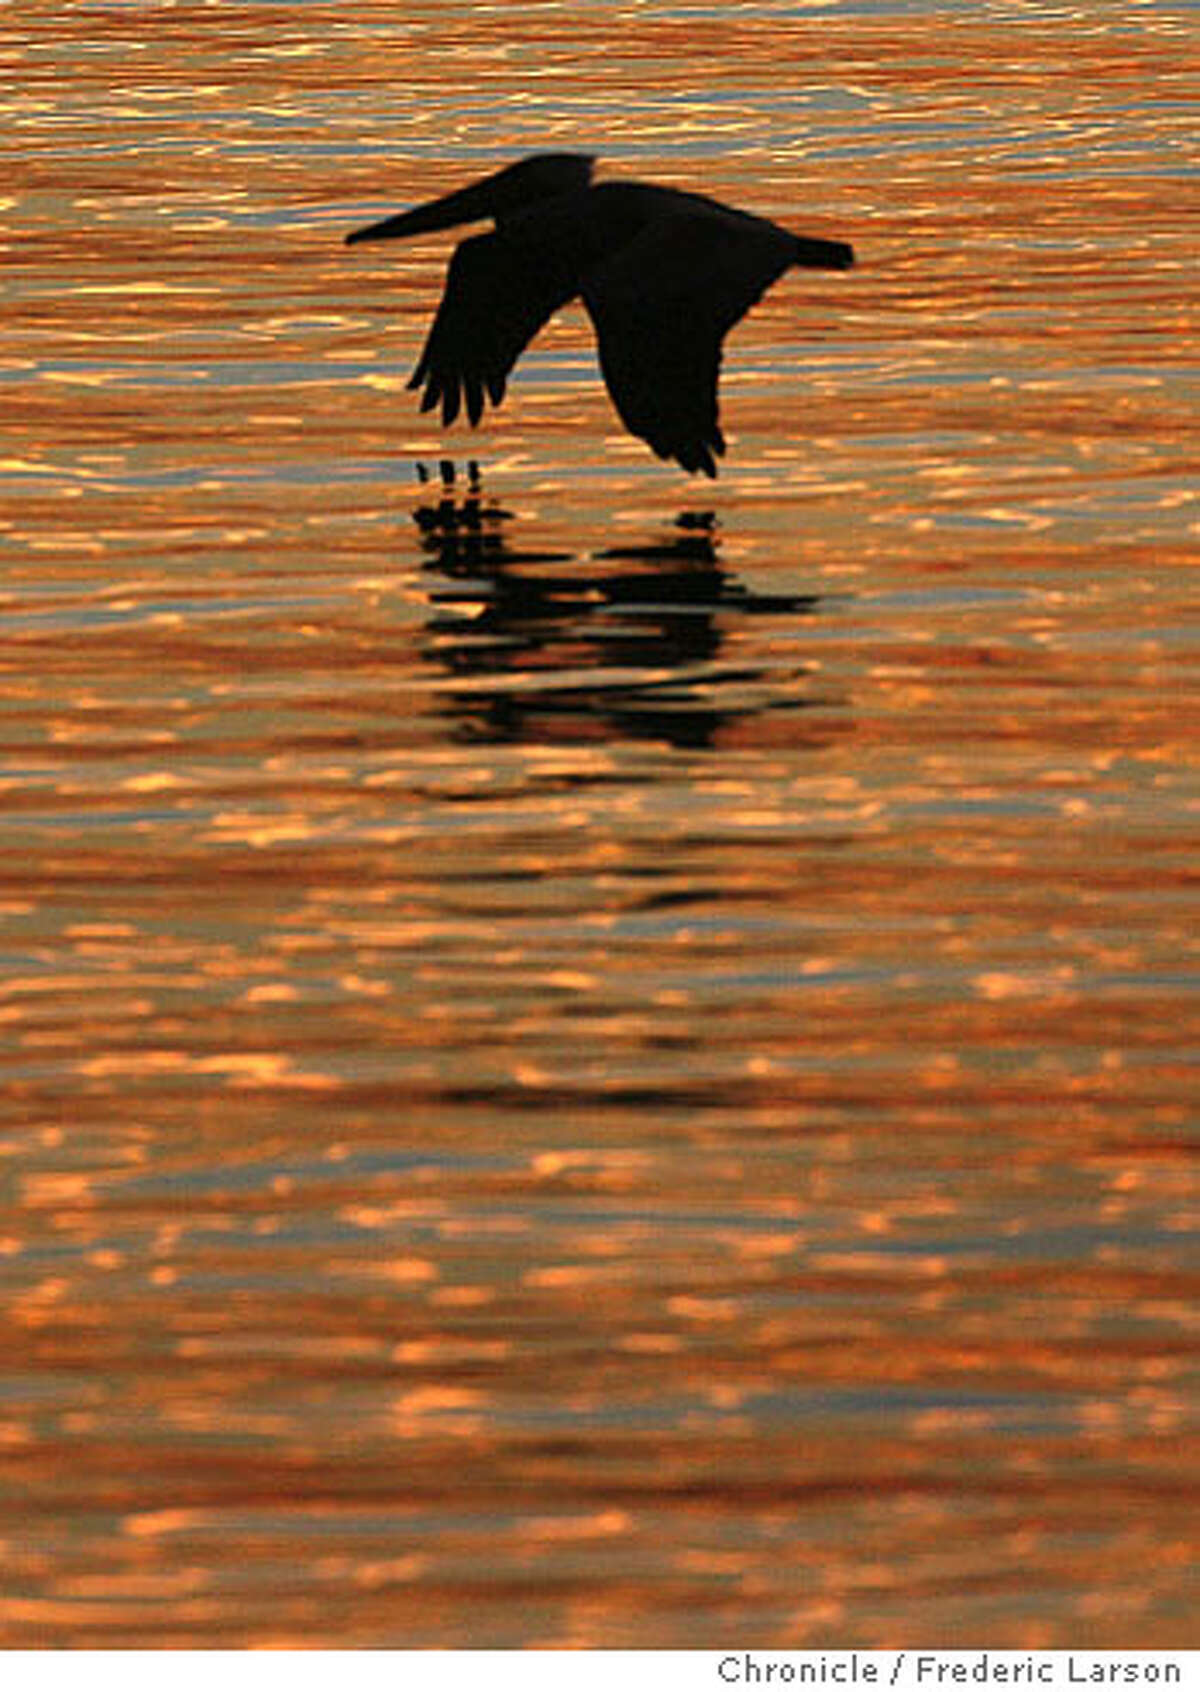 A pelican sails over the bay as the sun warms up the waters during sunrise as seen form Sausalito. 11/15/07 {Photographed by Frederic Larson} Ran on: 11-16-2007 A pelican in flight is reflected in the water as the sun comes up over San Francisco Bay on Thursday. This tranquil scene was caught from the shore in Sausalito. Ran on: 11-16-2007 Ran on: 11-16-2007 Ran on: 11-24-2007